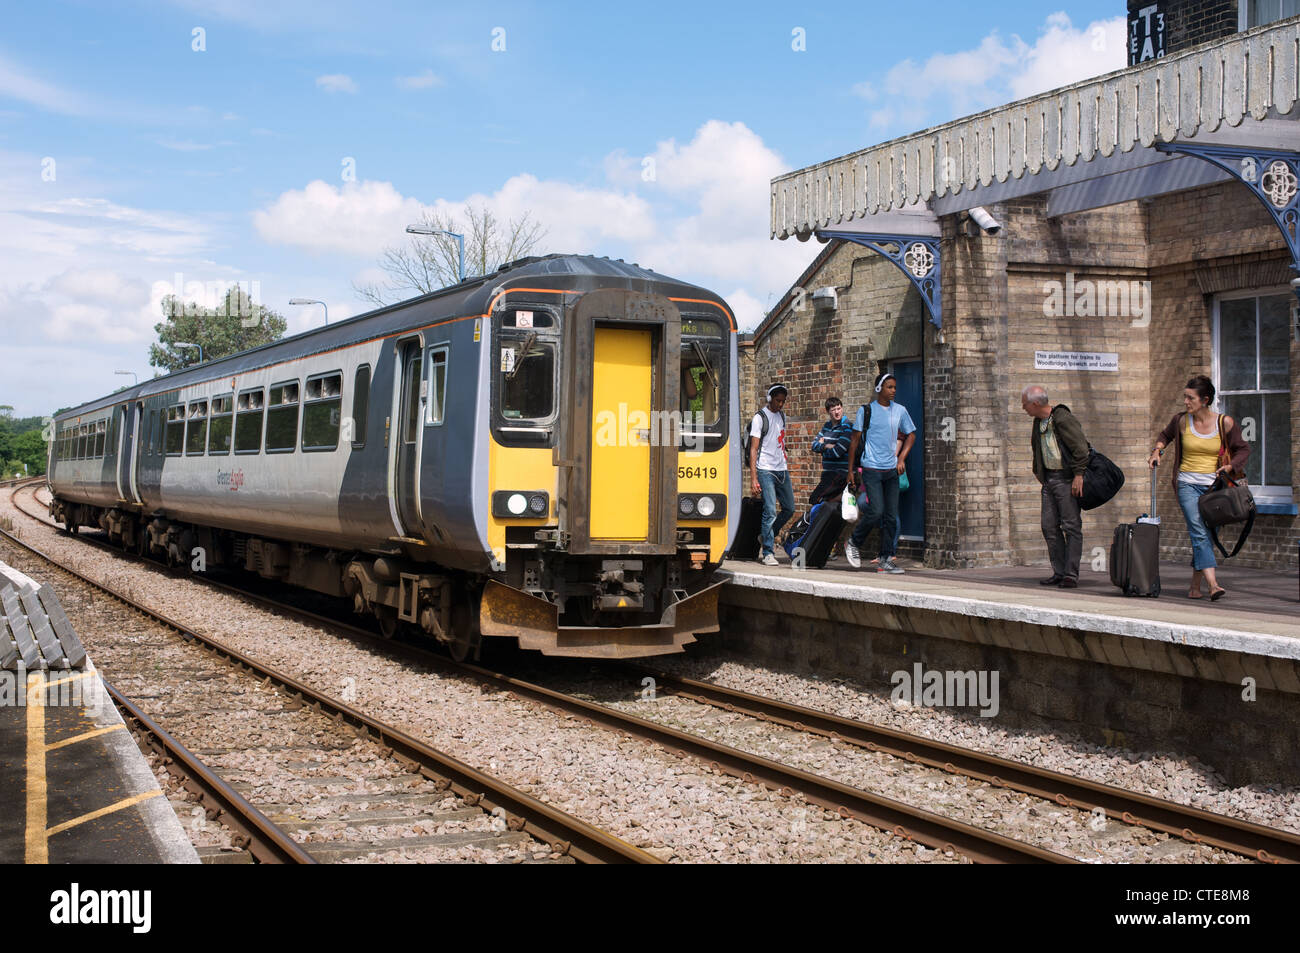 Saxmundam railway station on the 49-mile branch line between Lowestoft and Ipswich, Suffolk, UK. Stock Photo